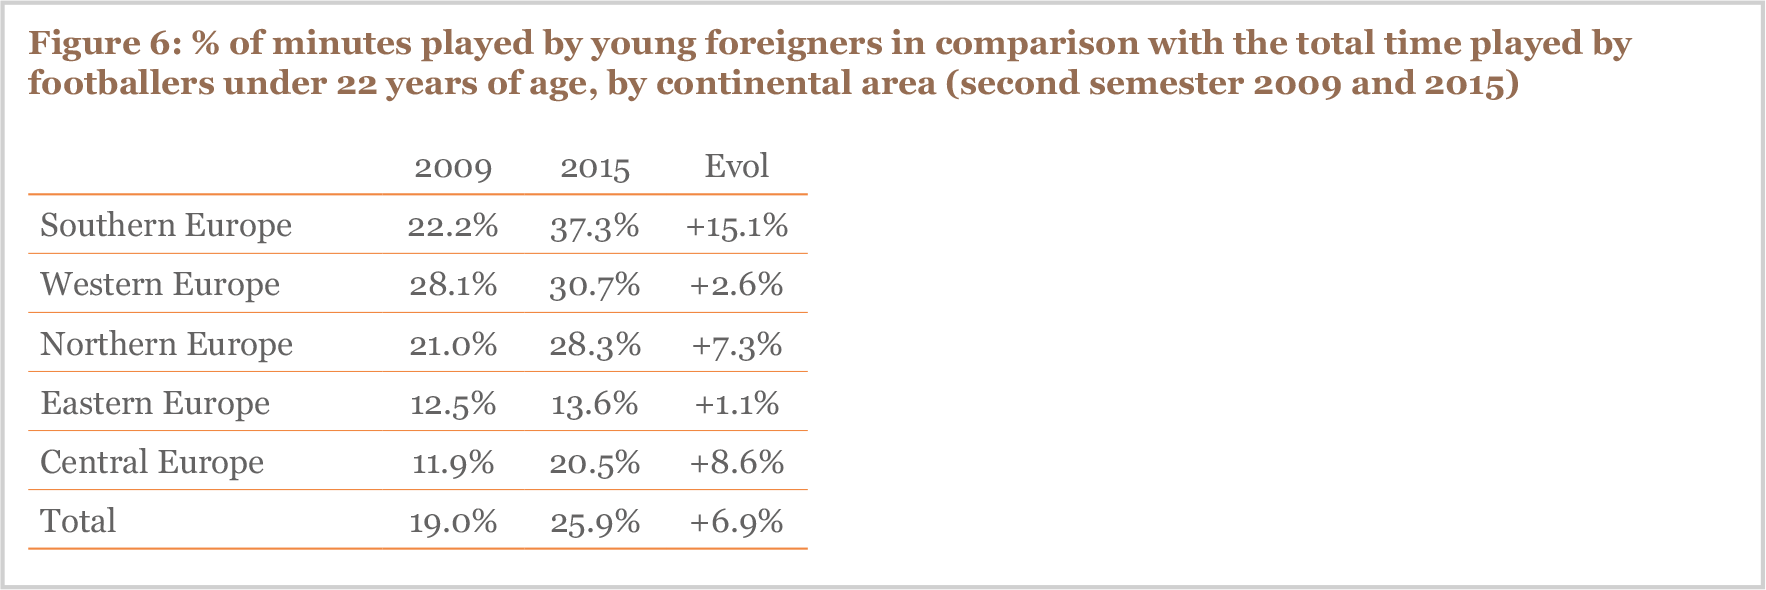 % of minutes played by young foreigners in comparison with the total time played by footballers under 22 years of age, by continental area